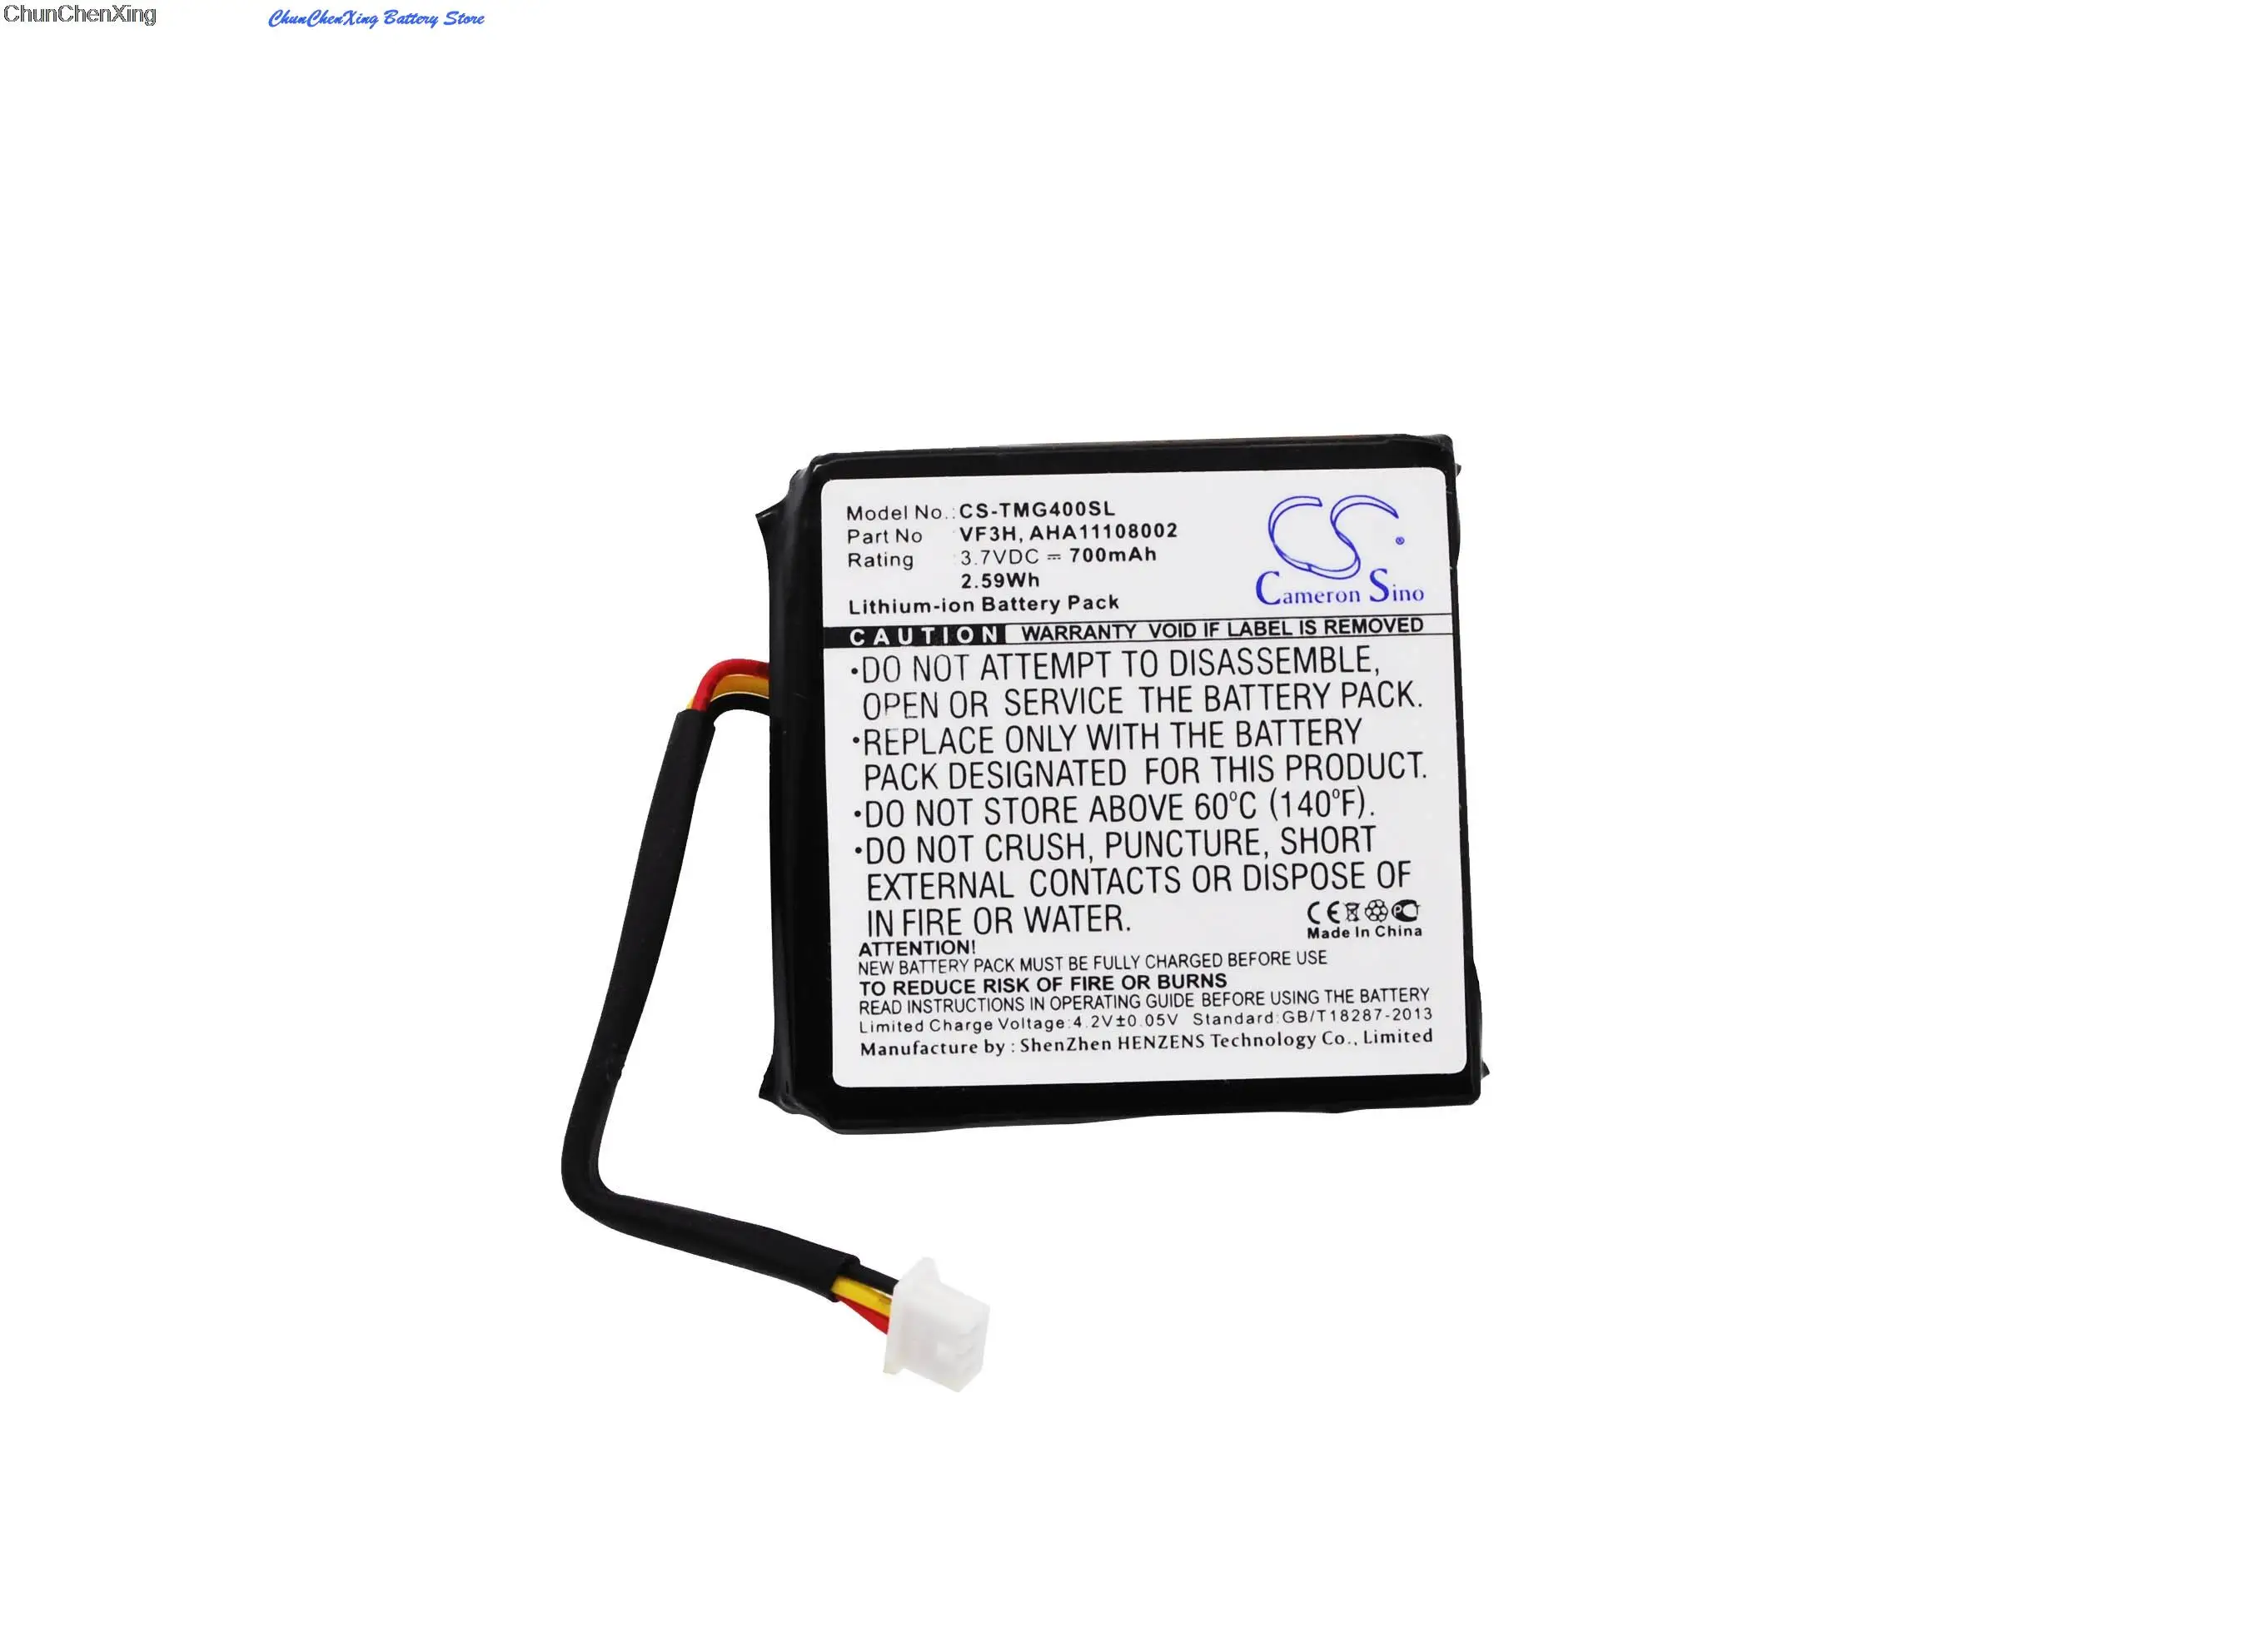 

Cameron Sino 700mAh Battery AHA11108002, VF3H for TomTom Go 400 4.3", Go 400 Touch, Please double check the connector